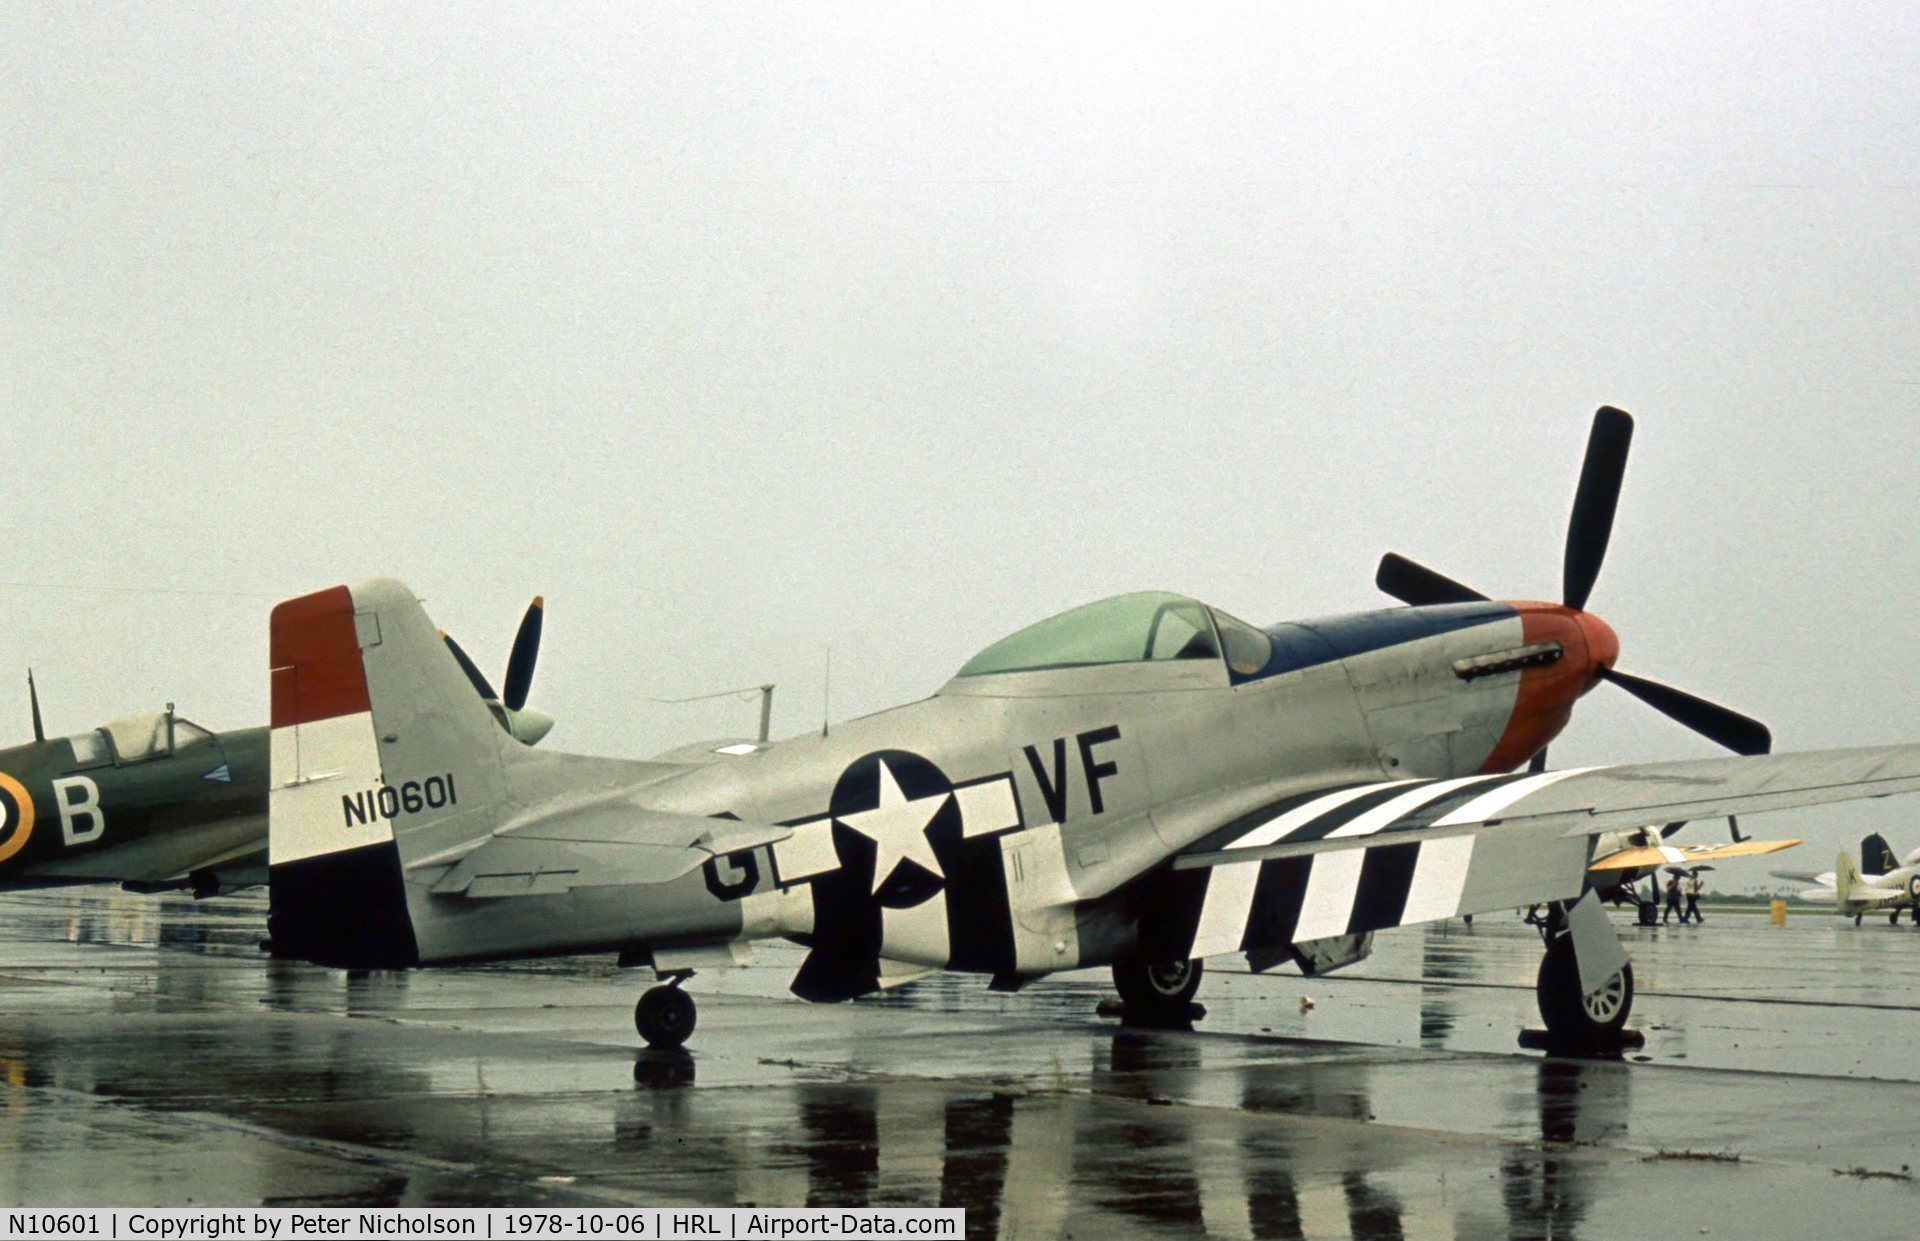 N10601, 1944 North American P-51D Mustang C/N 122-40383, P-51D Mustang 44-73843 at the Confederate Air Force's 1978 Airshow.